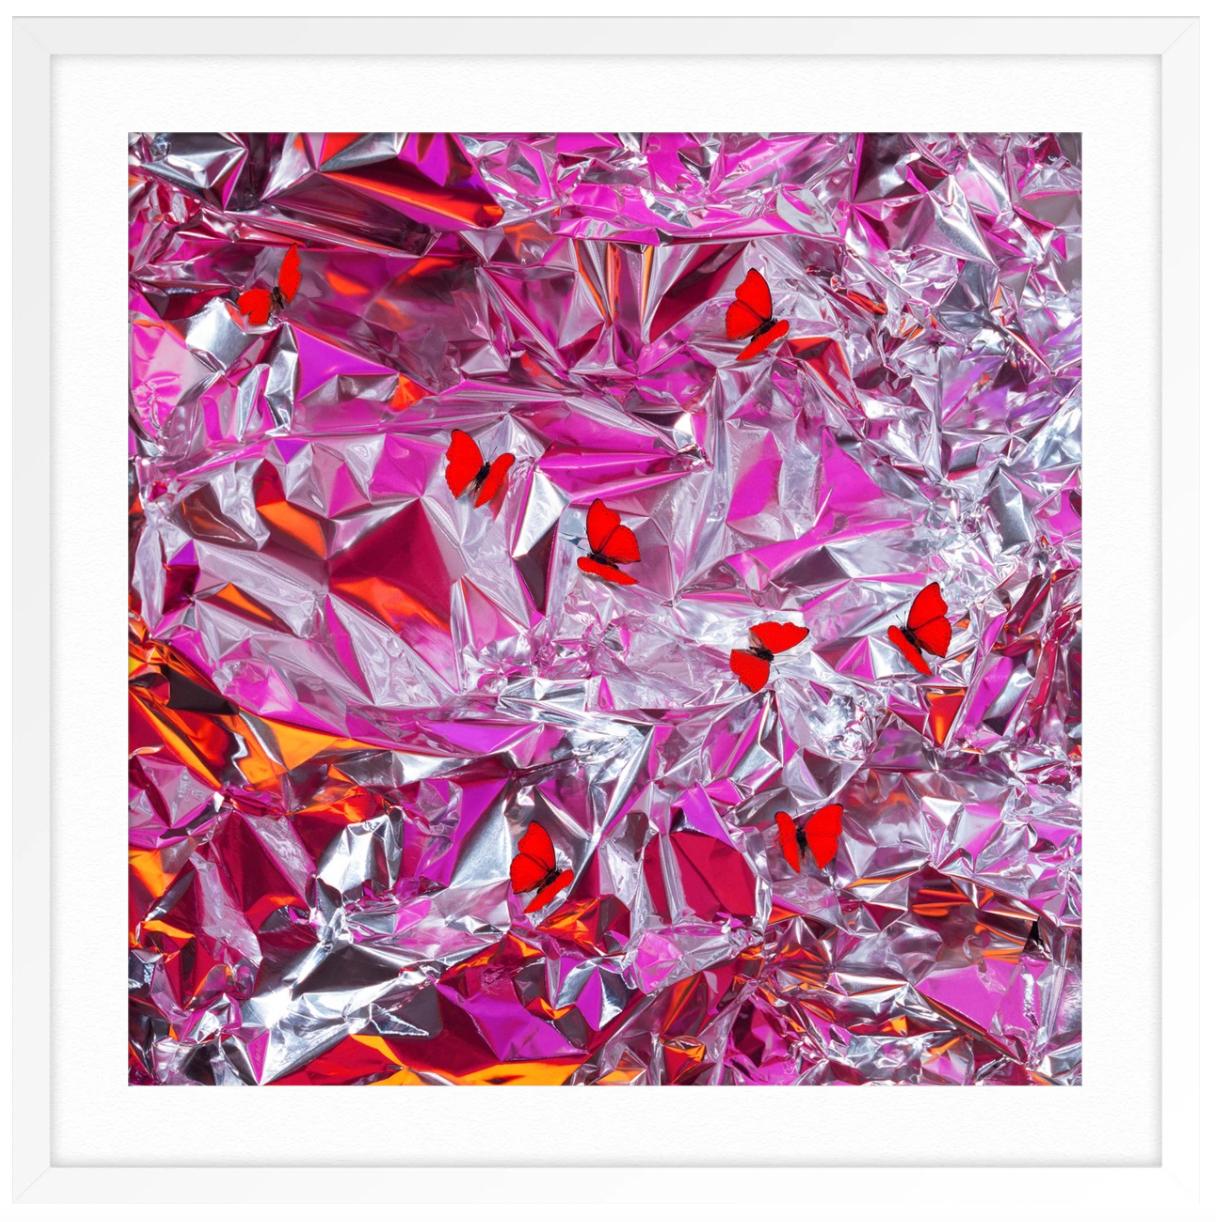 Innocence 25 - Pink Abstract Print by Laurent Elie Badessi